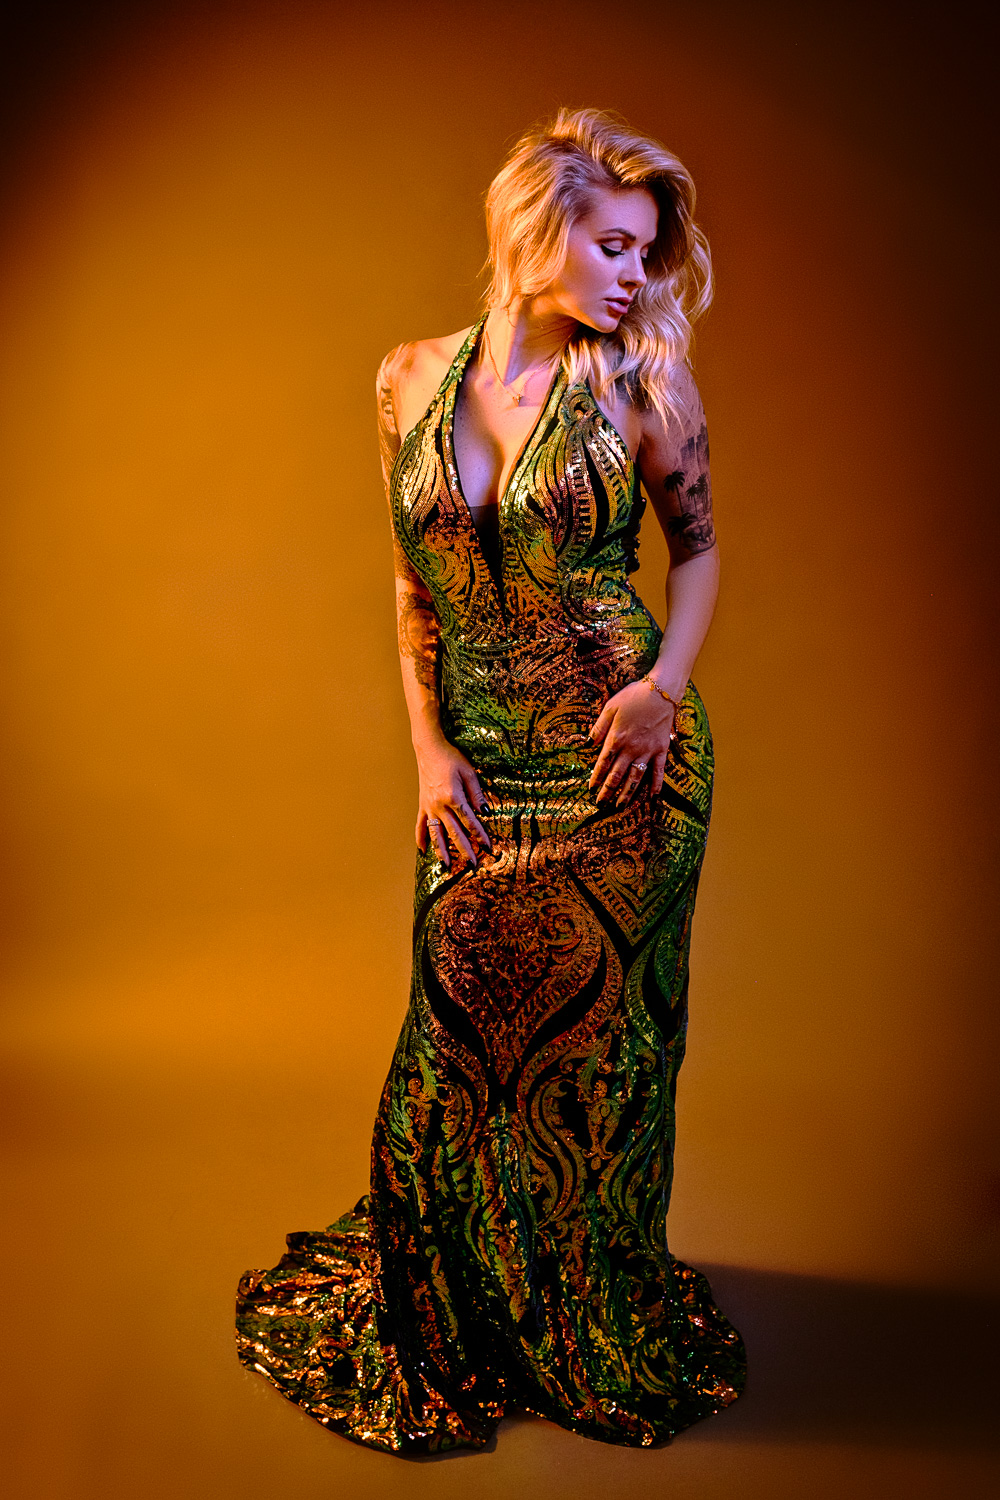 Beautiful blonde woman wearing an orange and green sequin evening gown on an orange backdrop